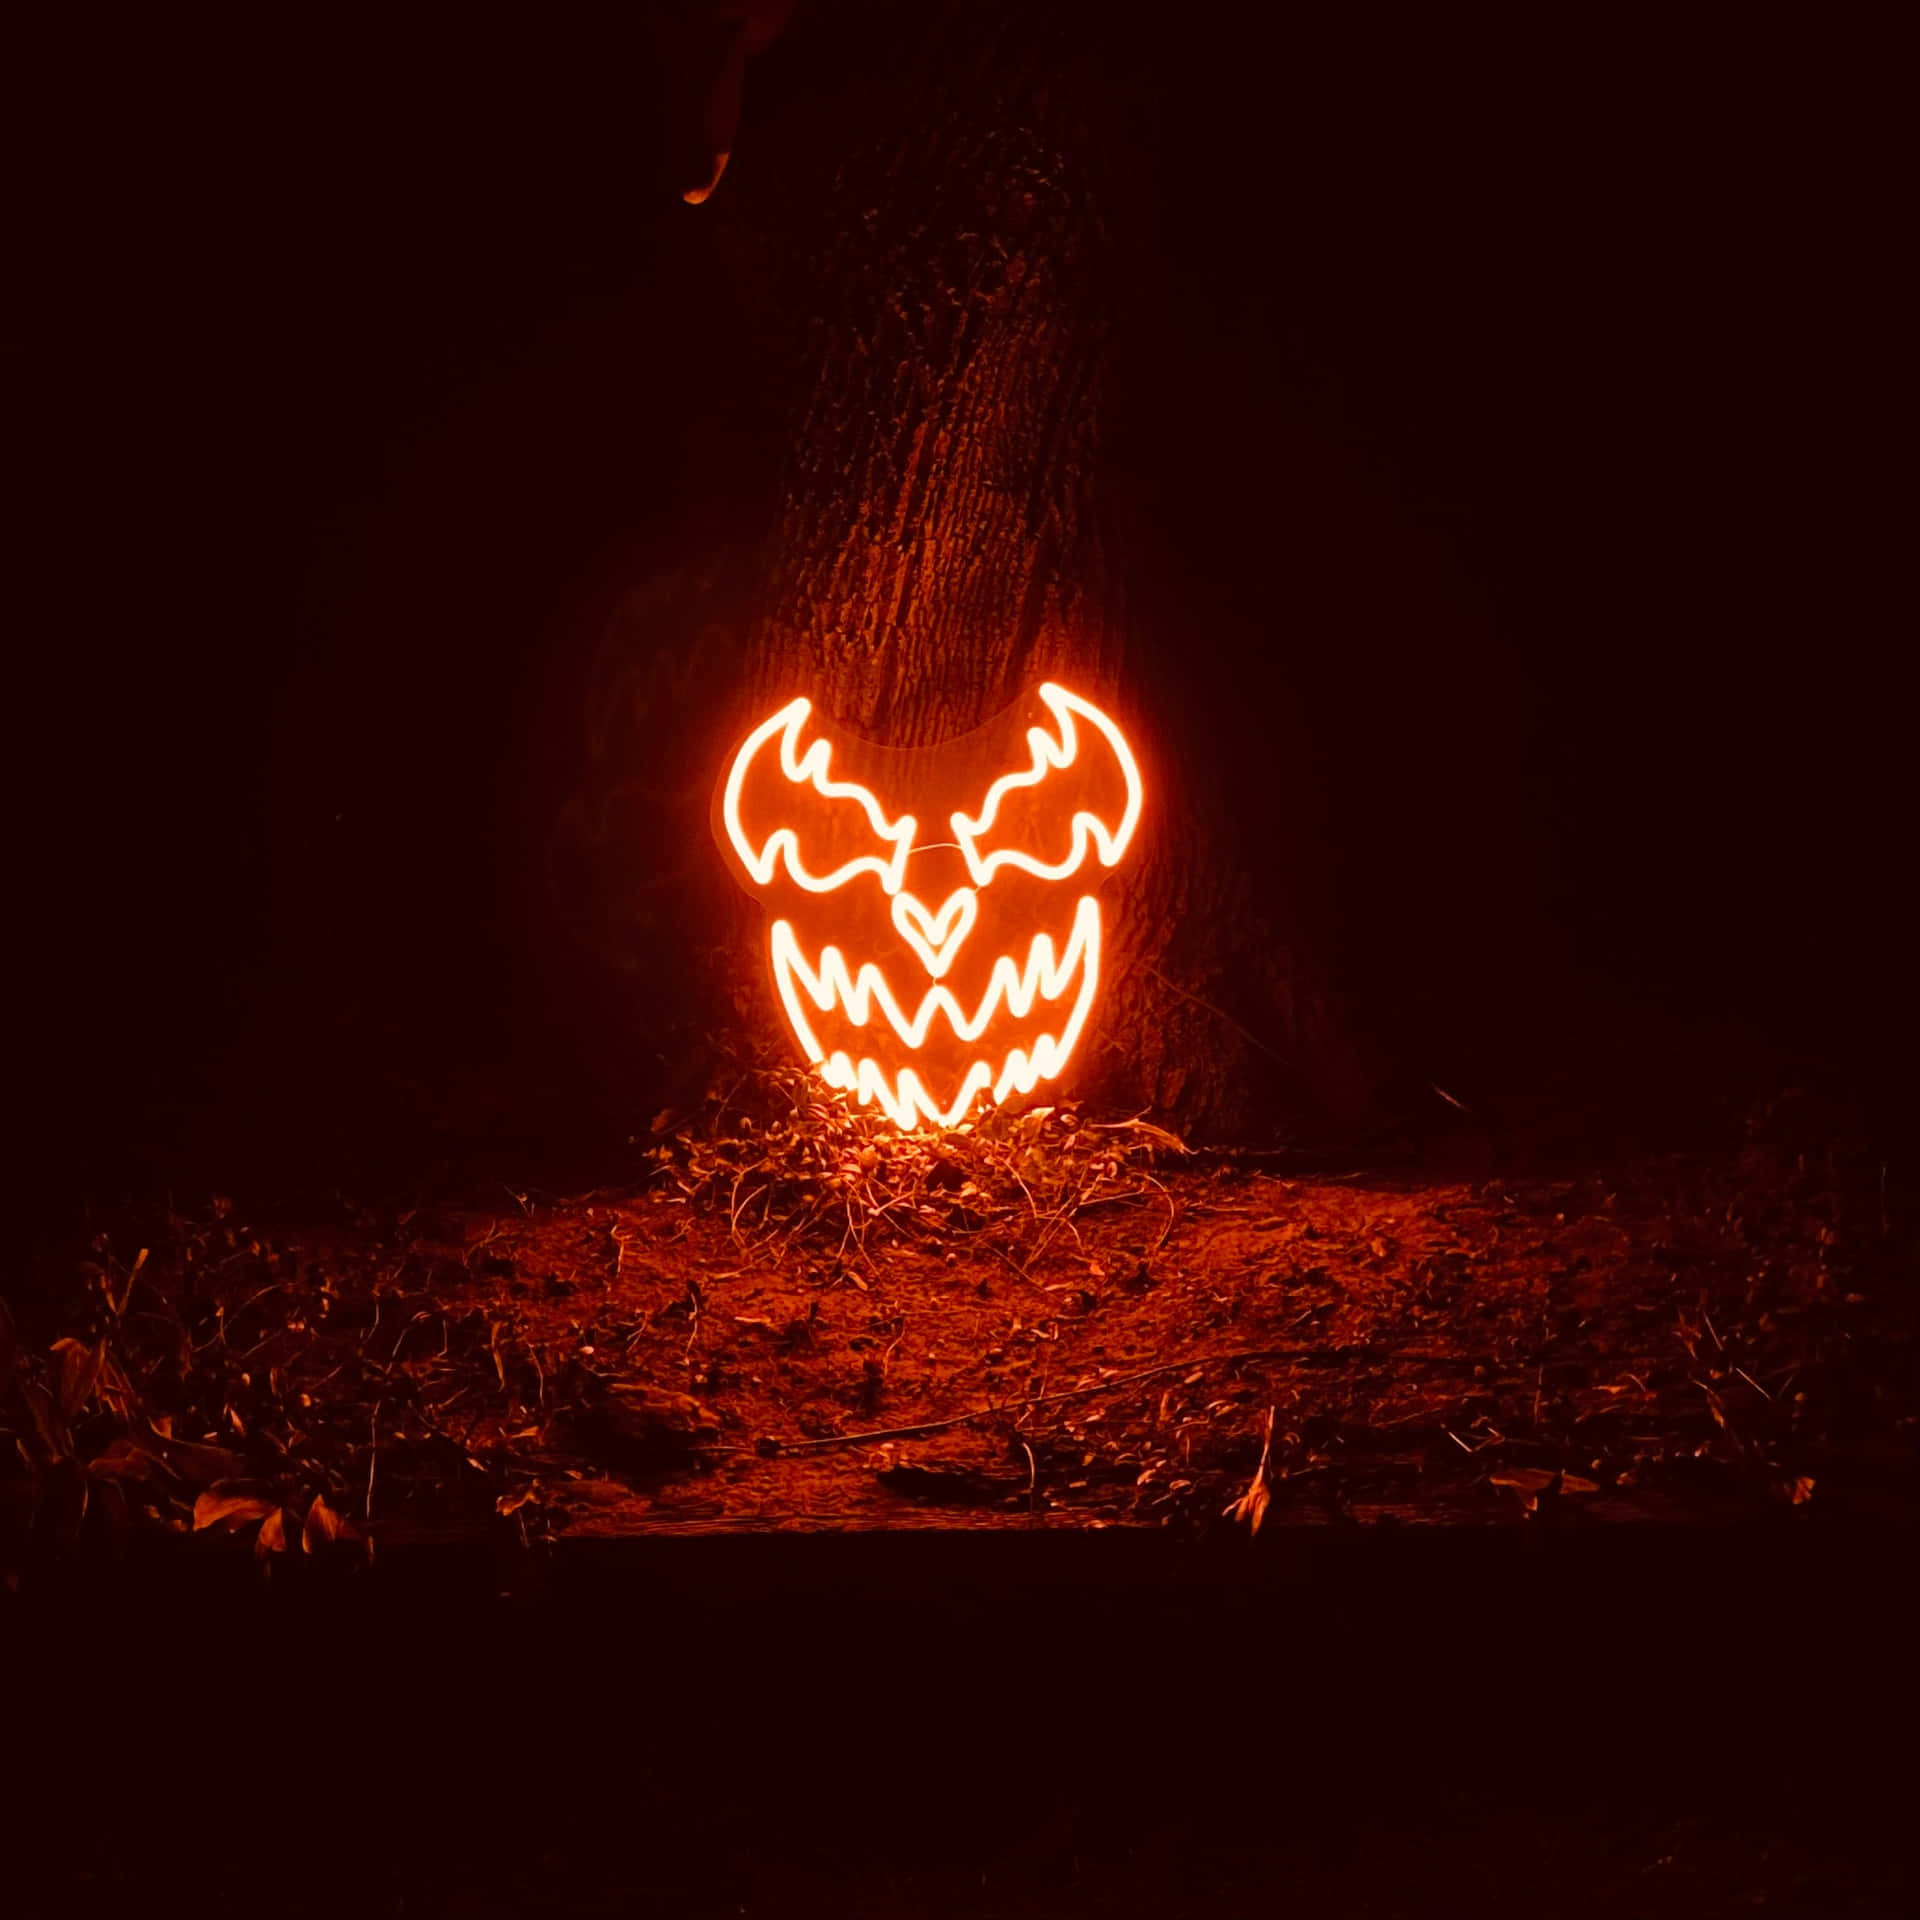 A Lighted Pumpkin Is Sitting In The Dark Wallpaper